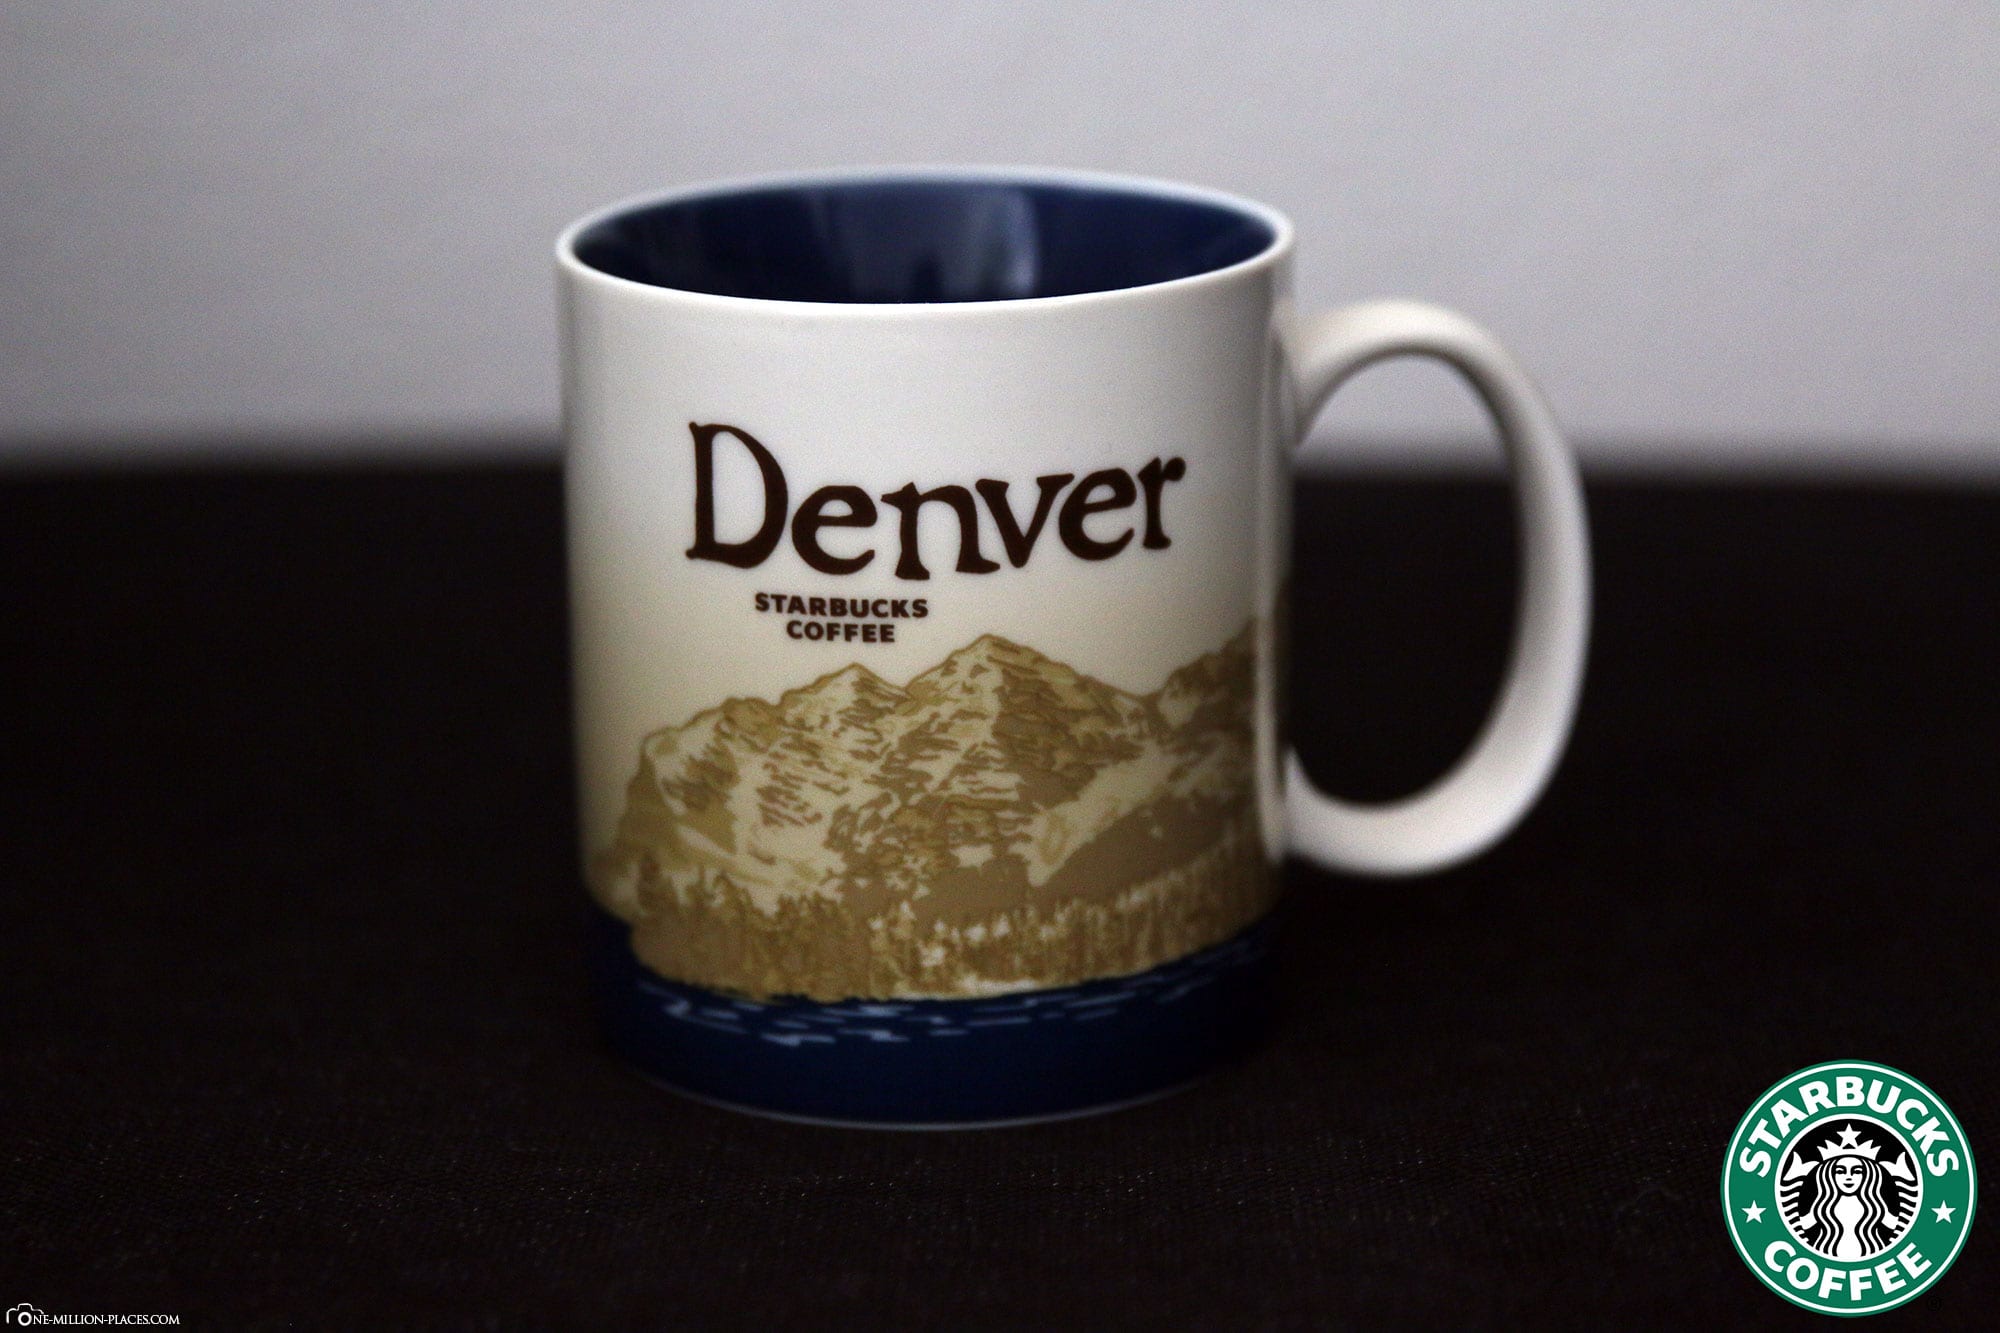 Denver, Starbucks Cup, Global Icon Series, City Mugs, Collection, USA, Travelreport